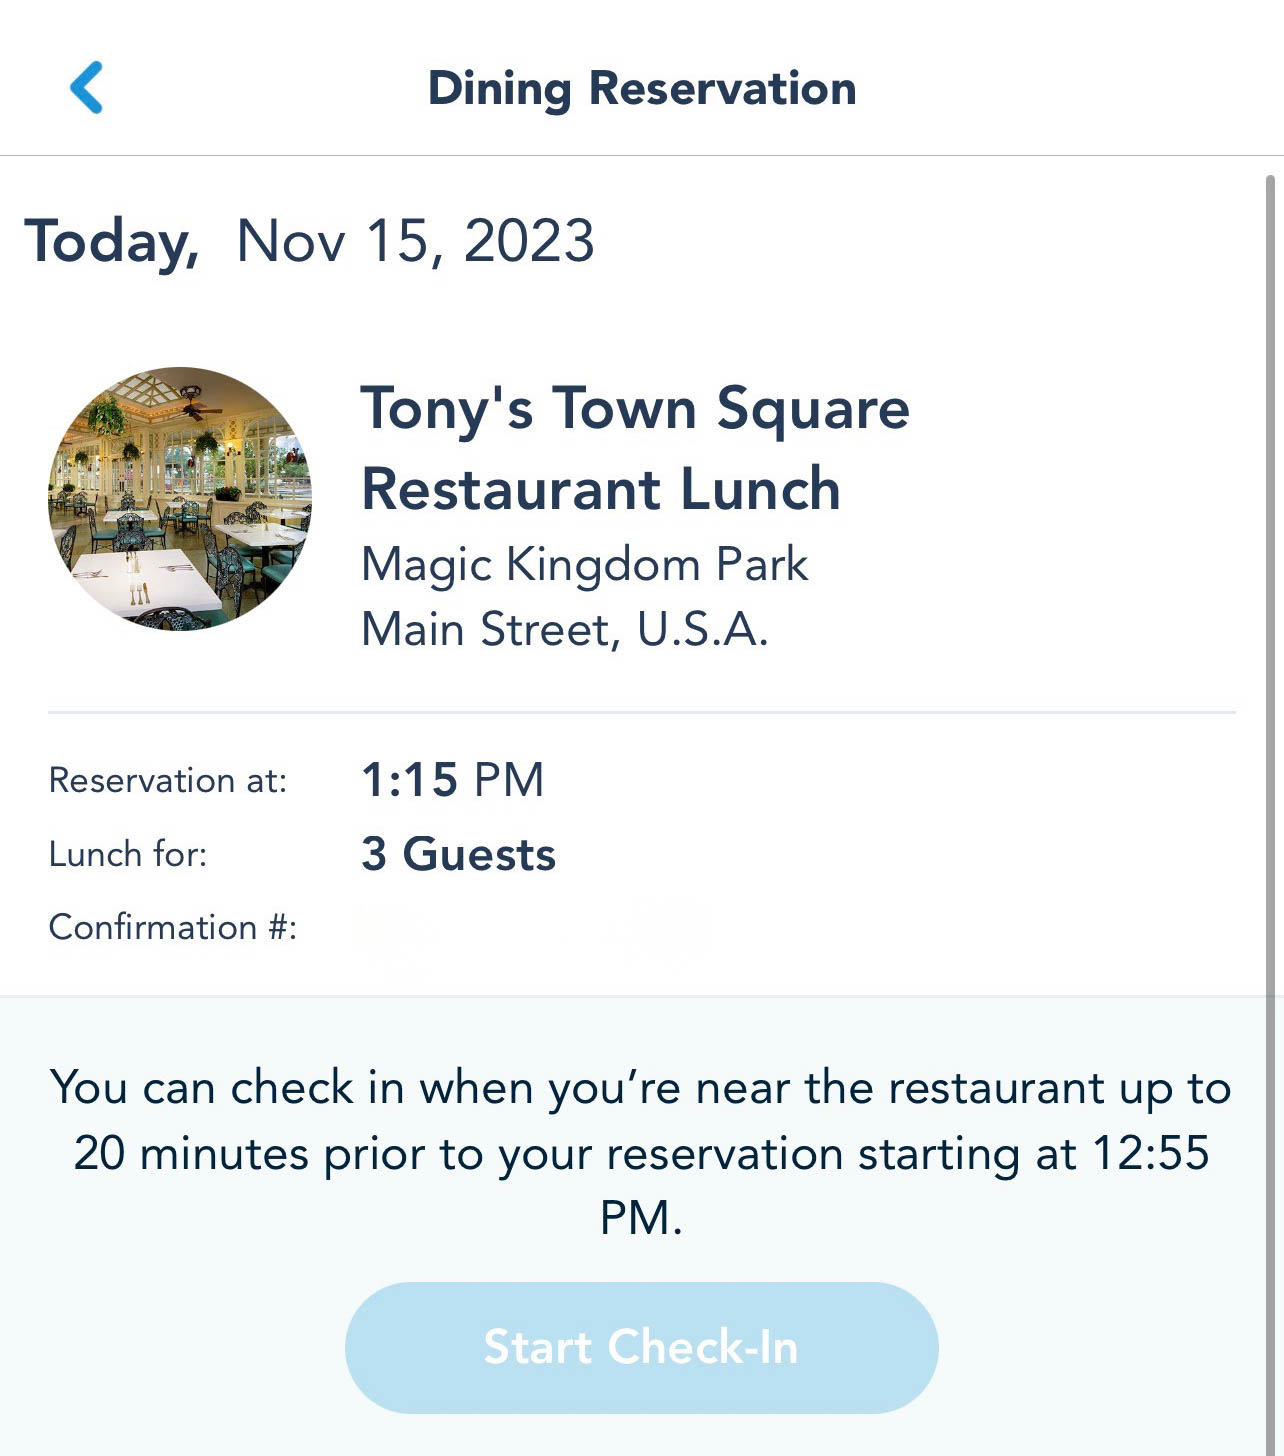 Tony's dining reservation